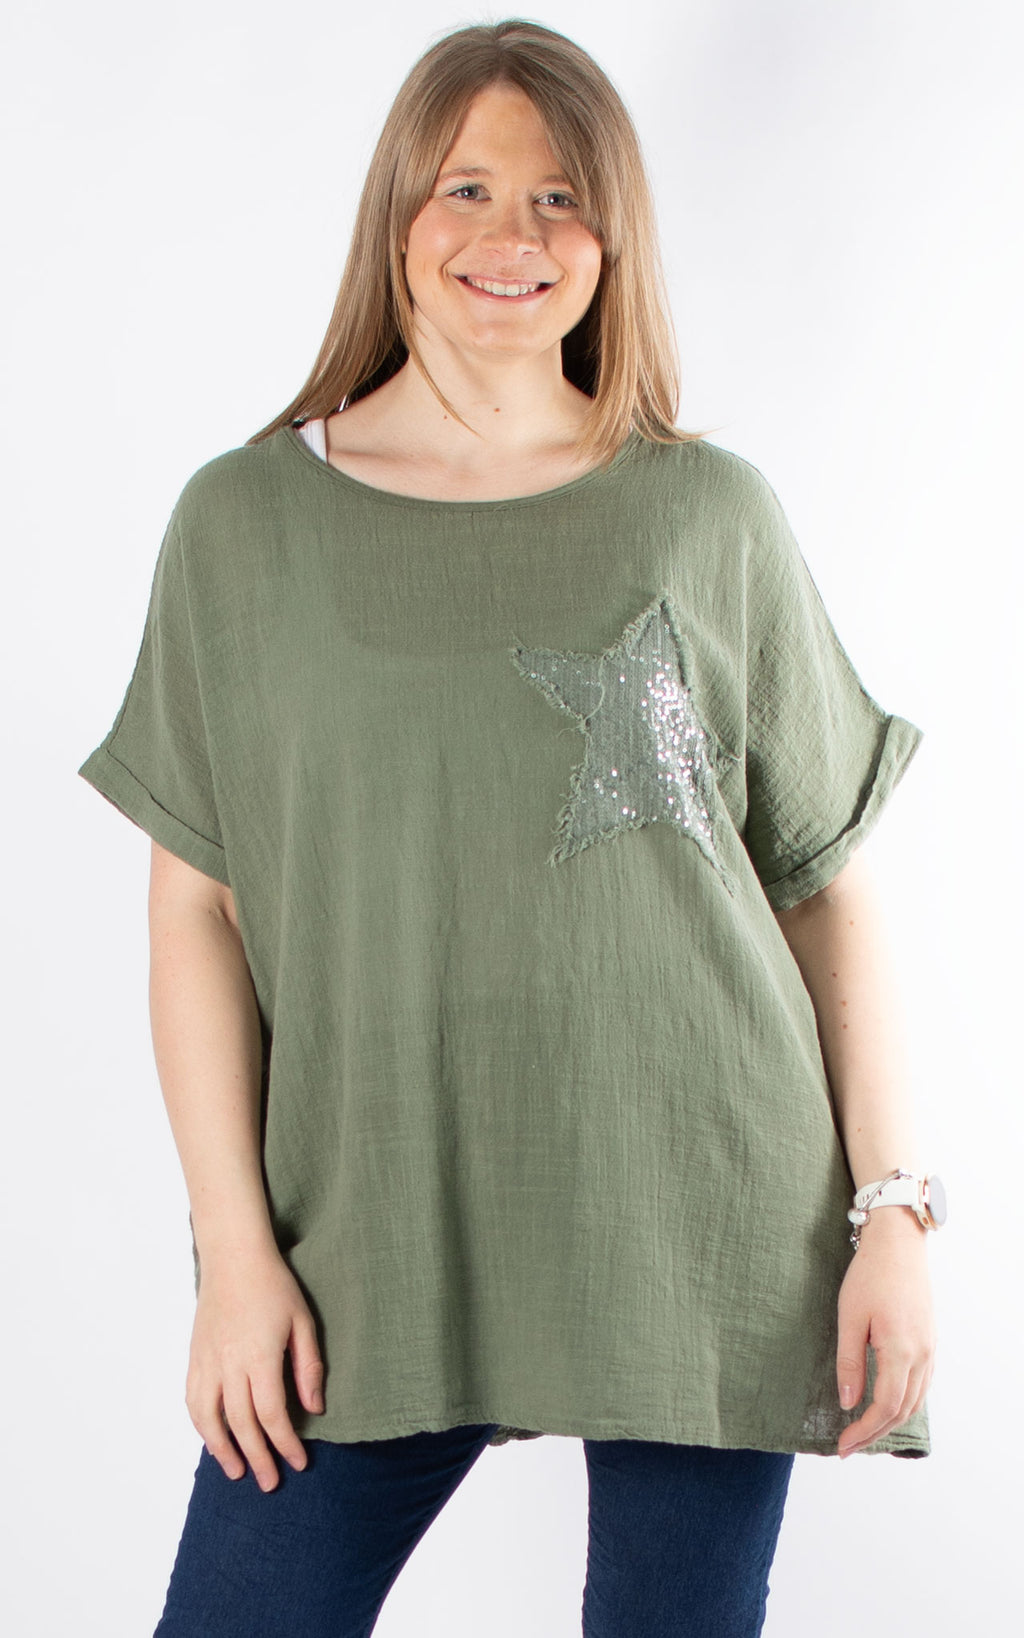 Sequin Star Cheesecloth Top | Khaki